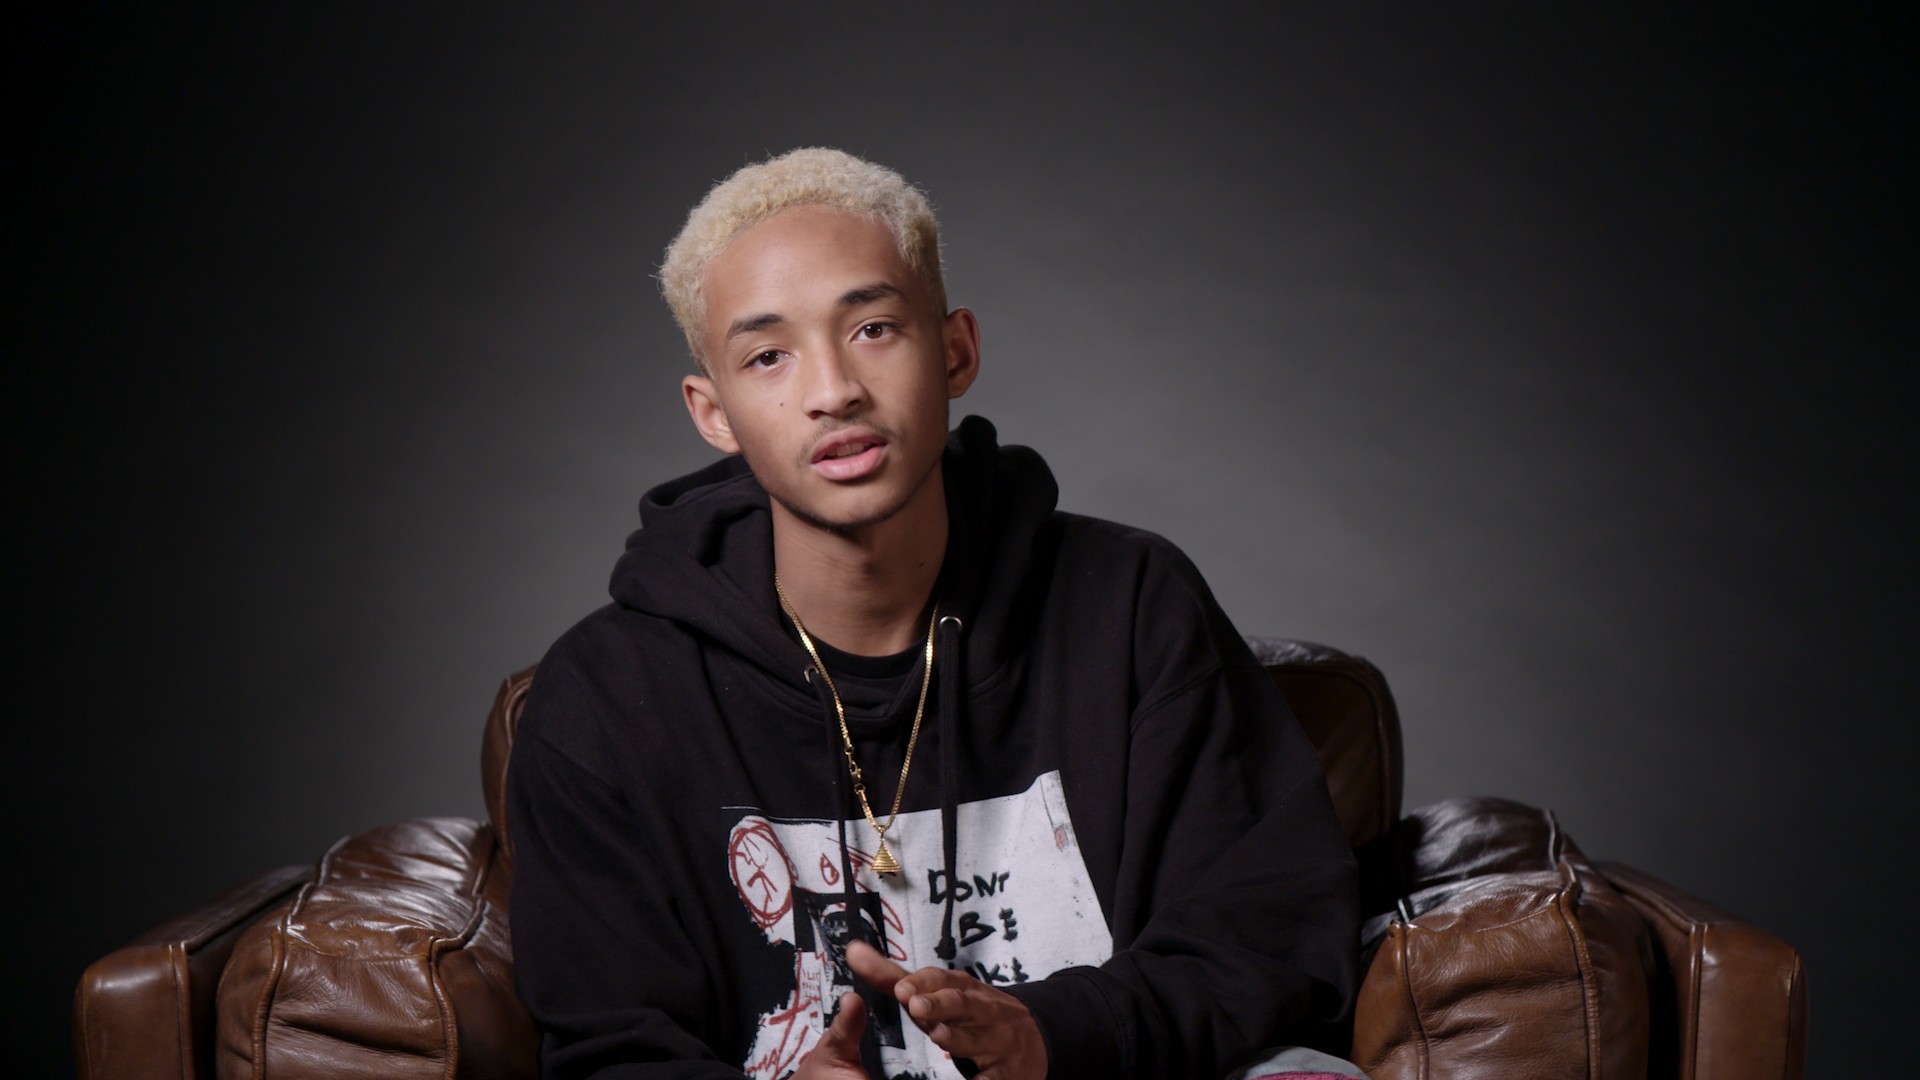 Jaden Smith Debuts SYRE The Electric Album on IG